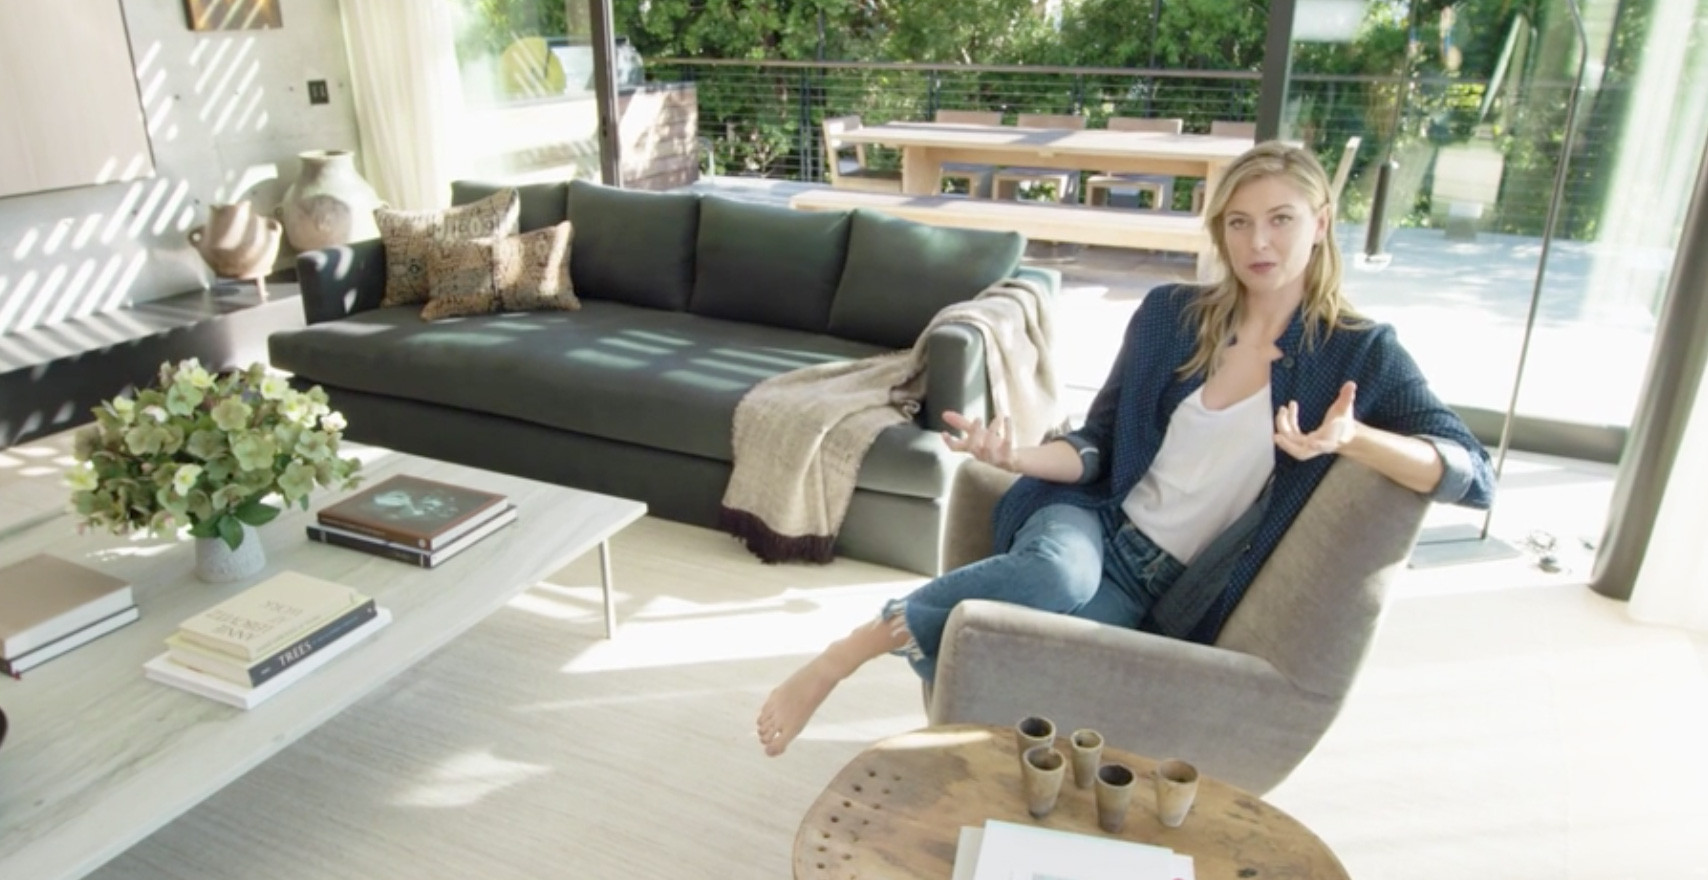 , Maria Sharapovas beachside home in Los Angeles with its own bowling alley is perfect for tennis stars retirement